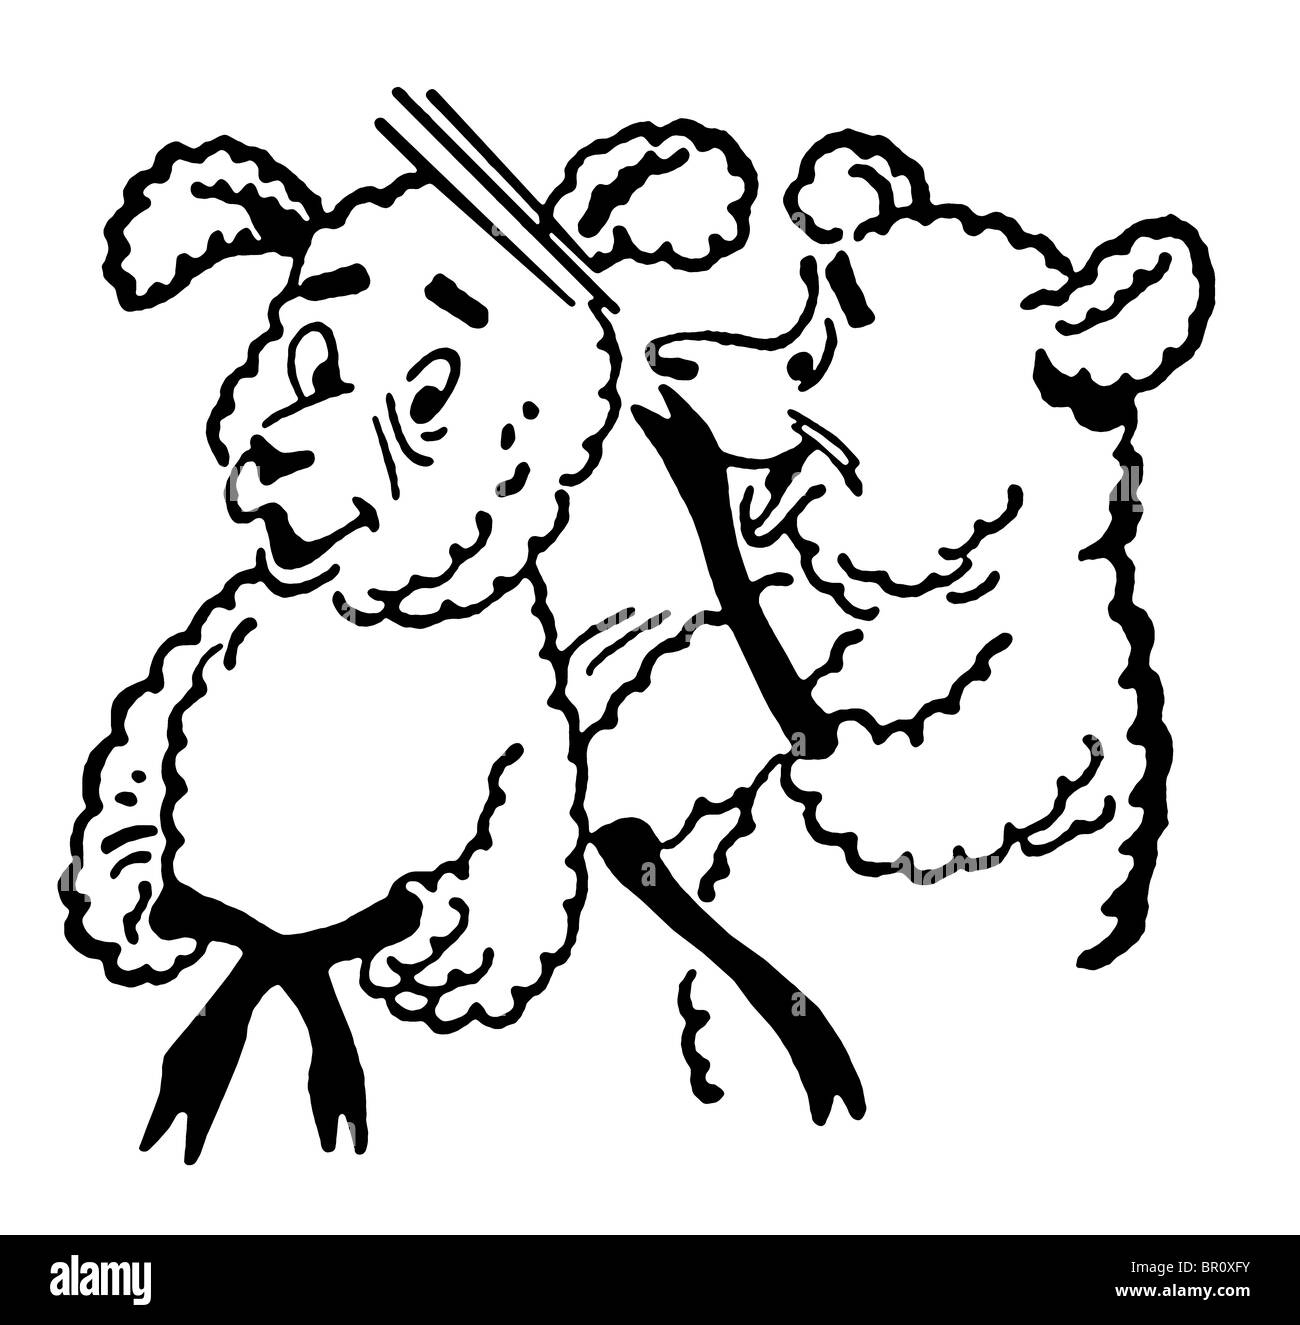 A black and white version of a black and white version of a cartoon style drawing of two sheep Stock Photo